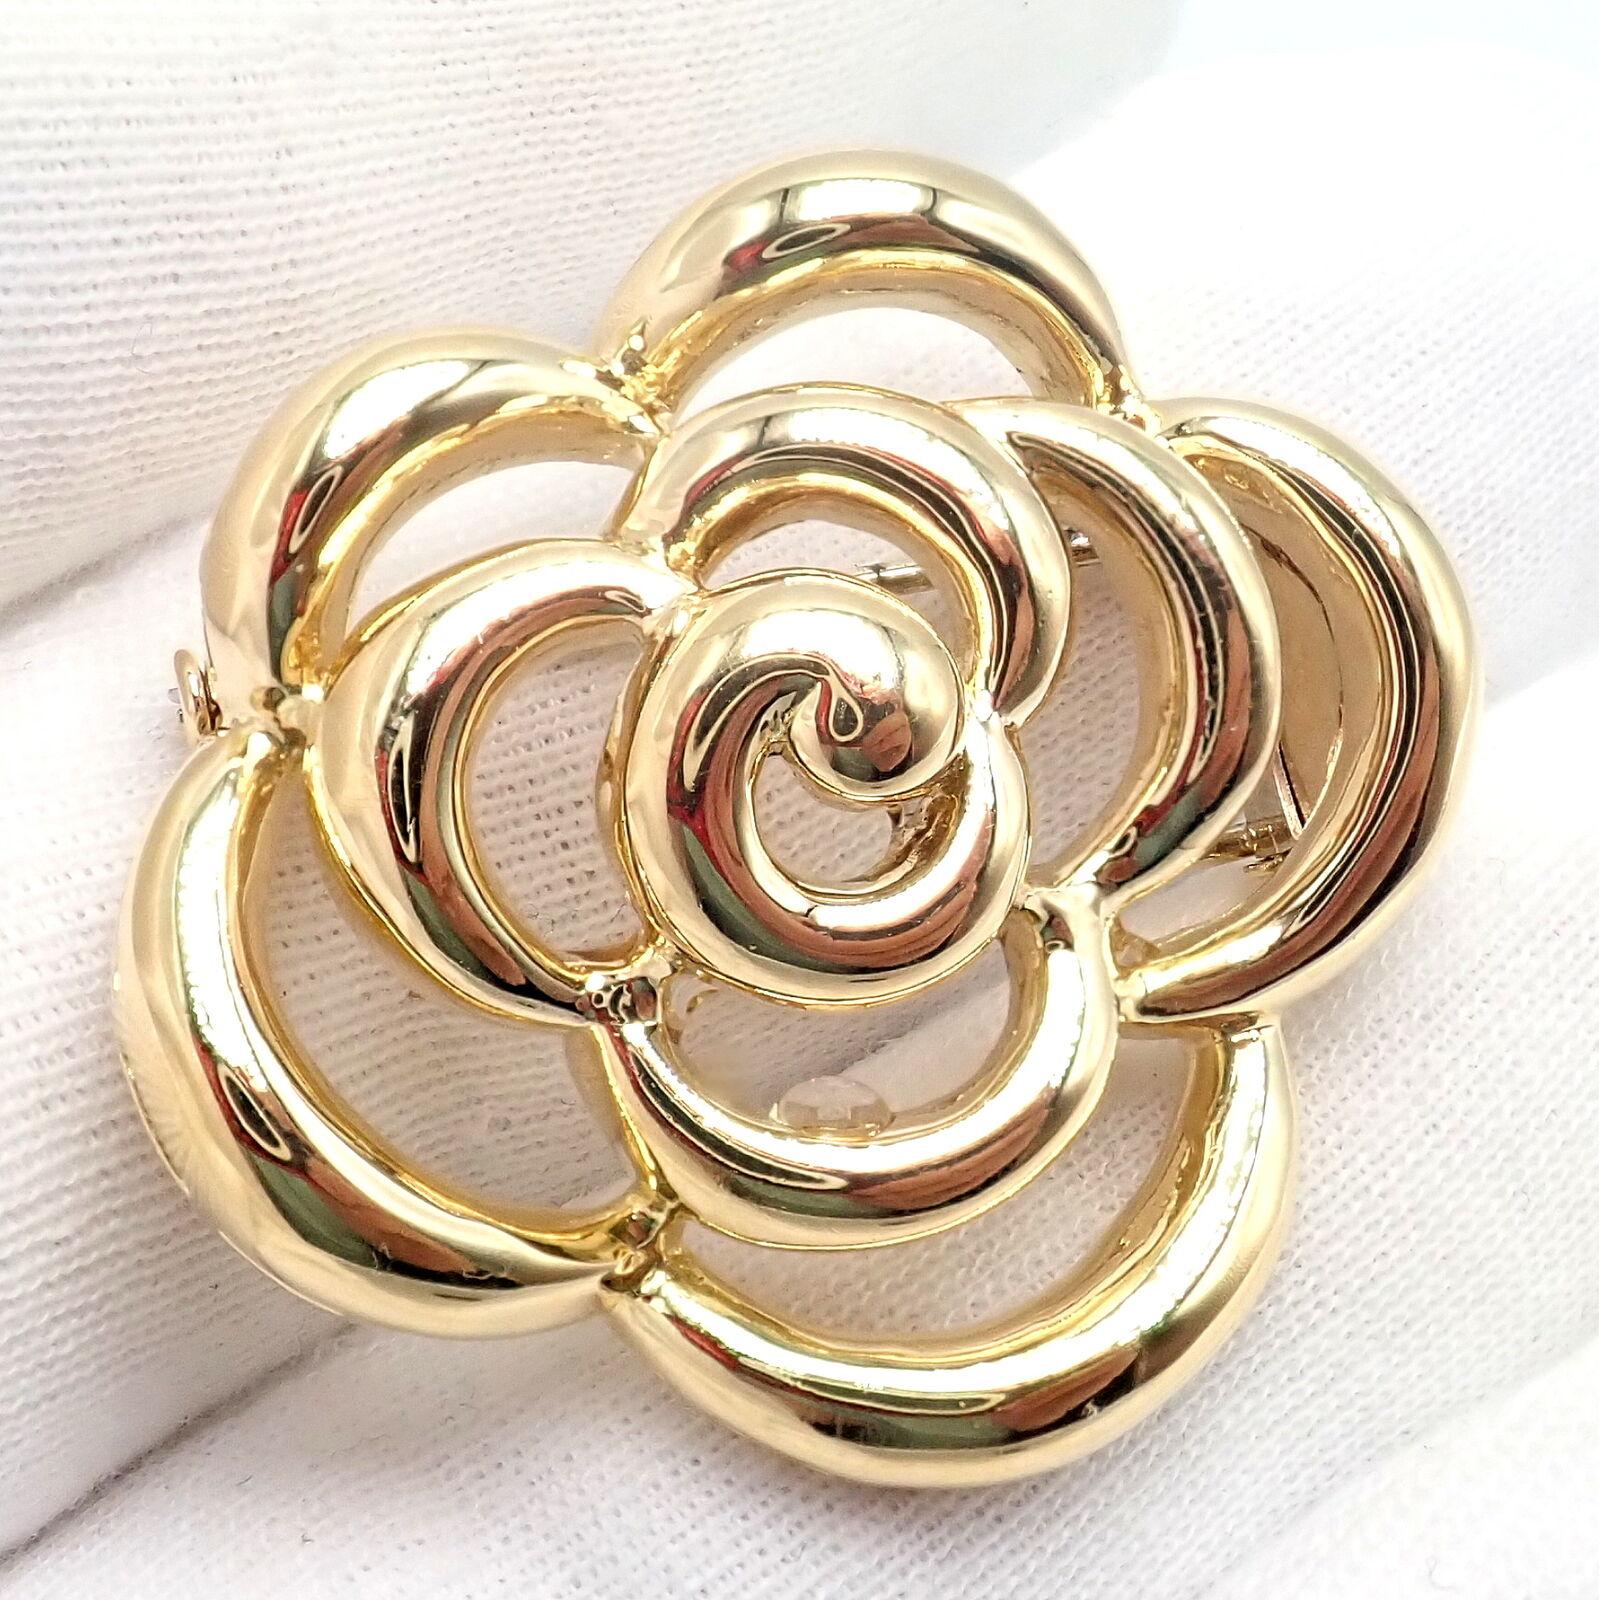 Van Cleef & Arpels Camellia Flower Yellow Gold Pin Brooch For Sale 2